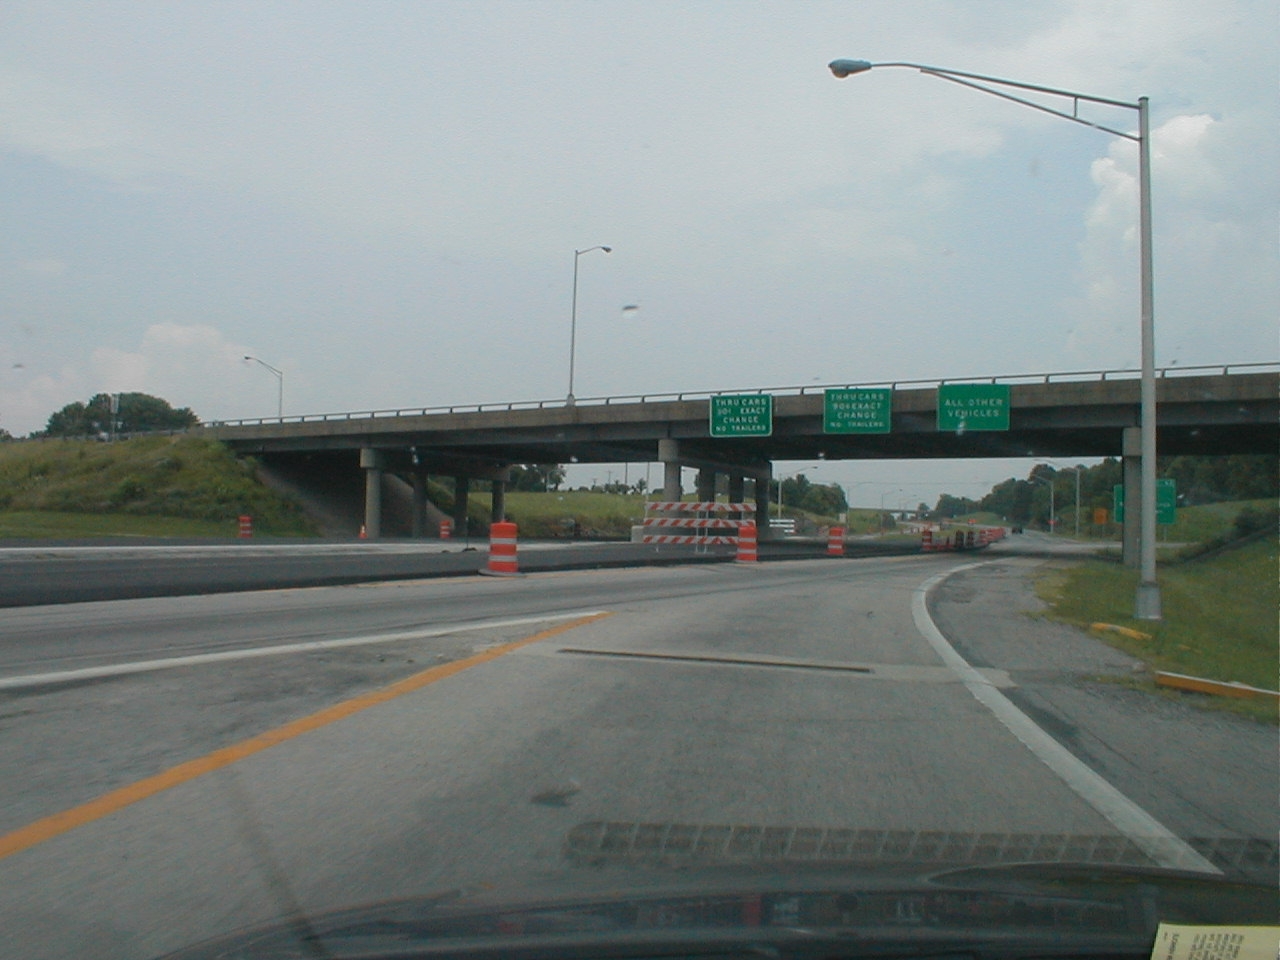 Toll instruction signage above Exit 62 is readable.